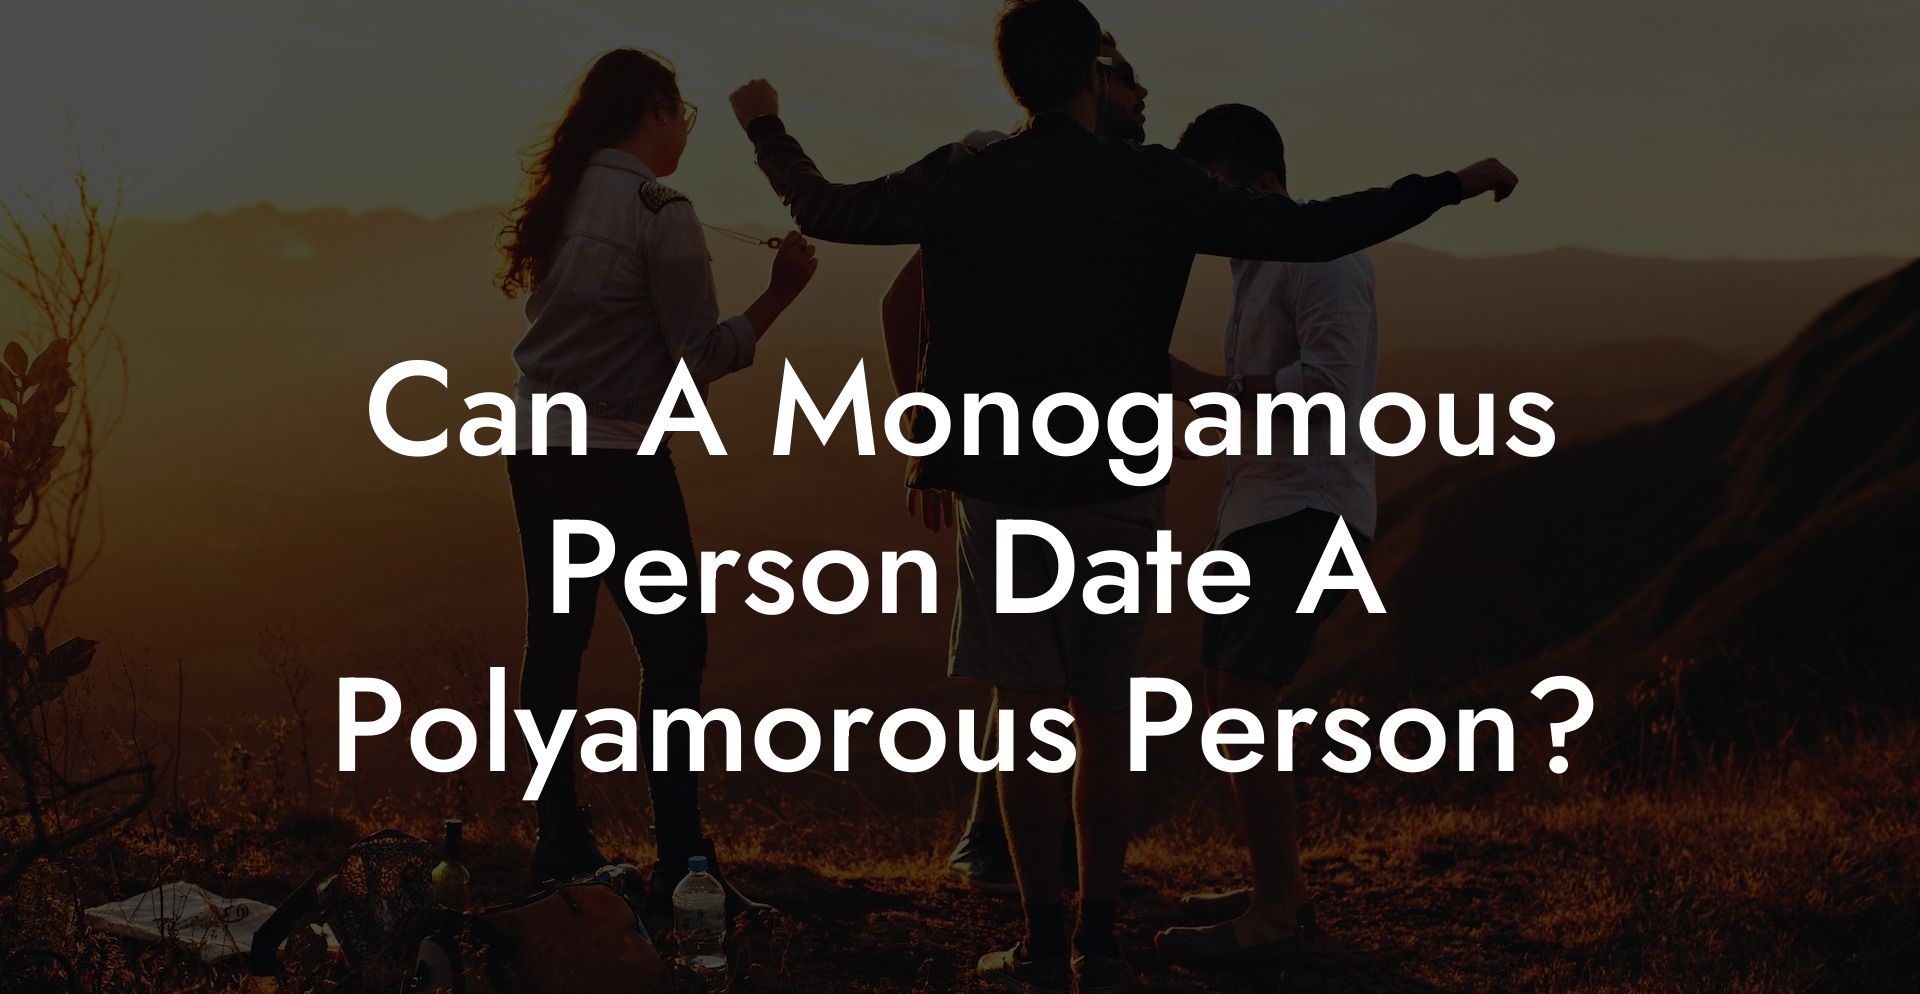 Can A Monogamous Person Date A Polyamorous Person?